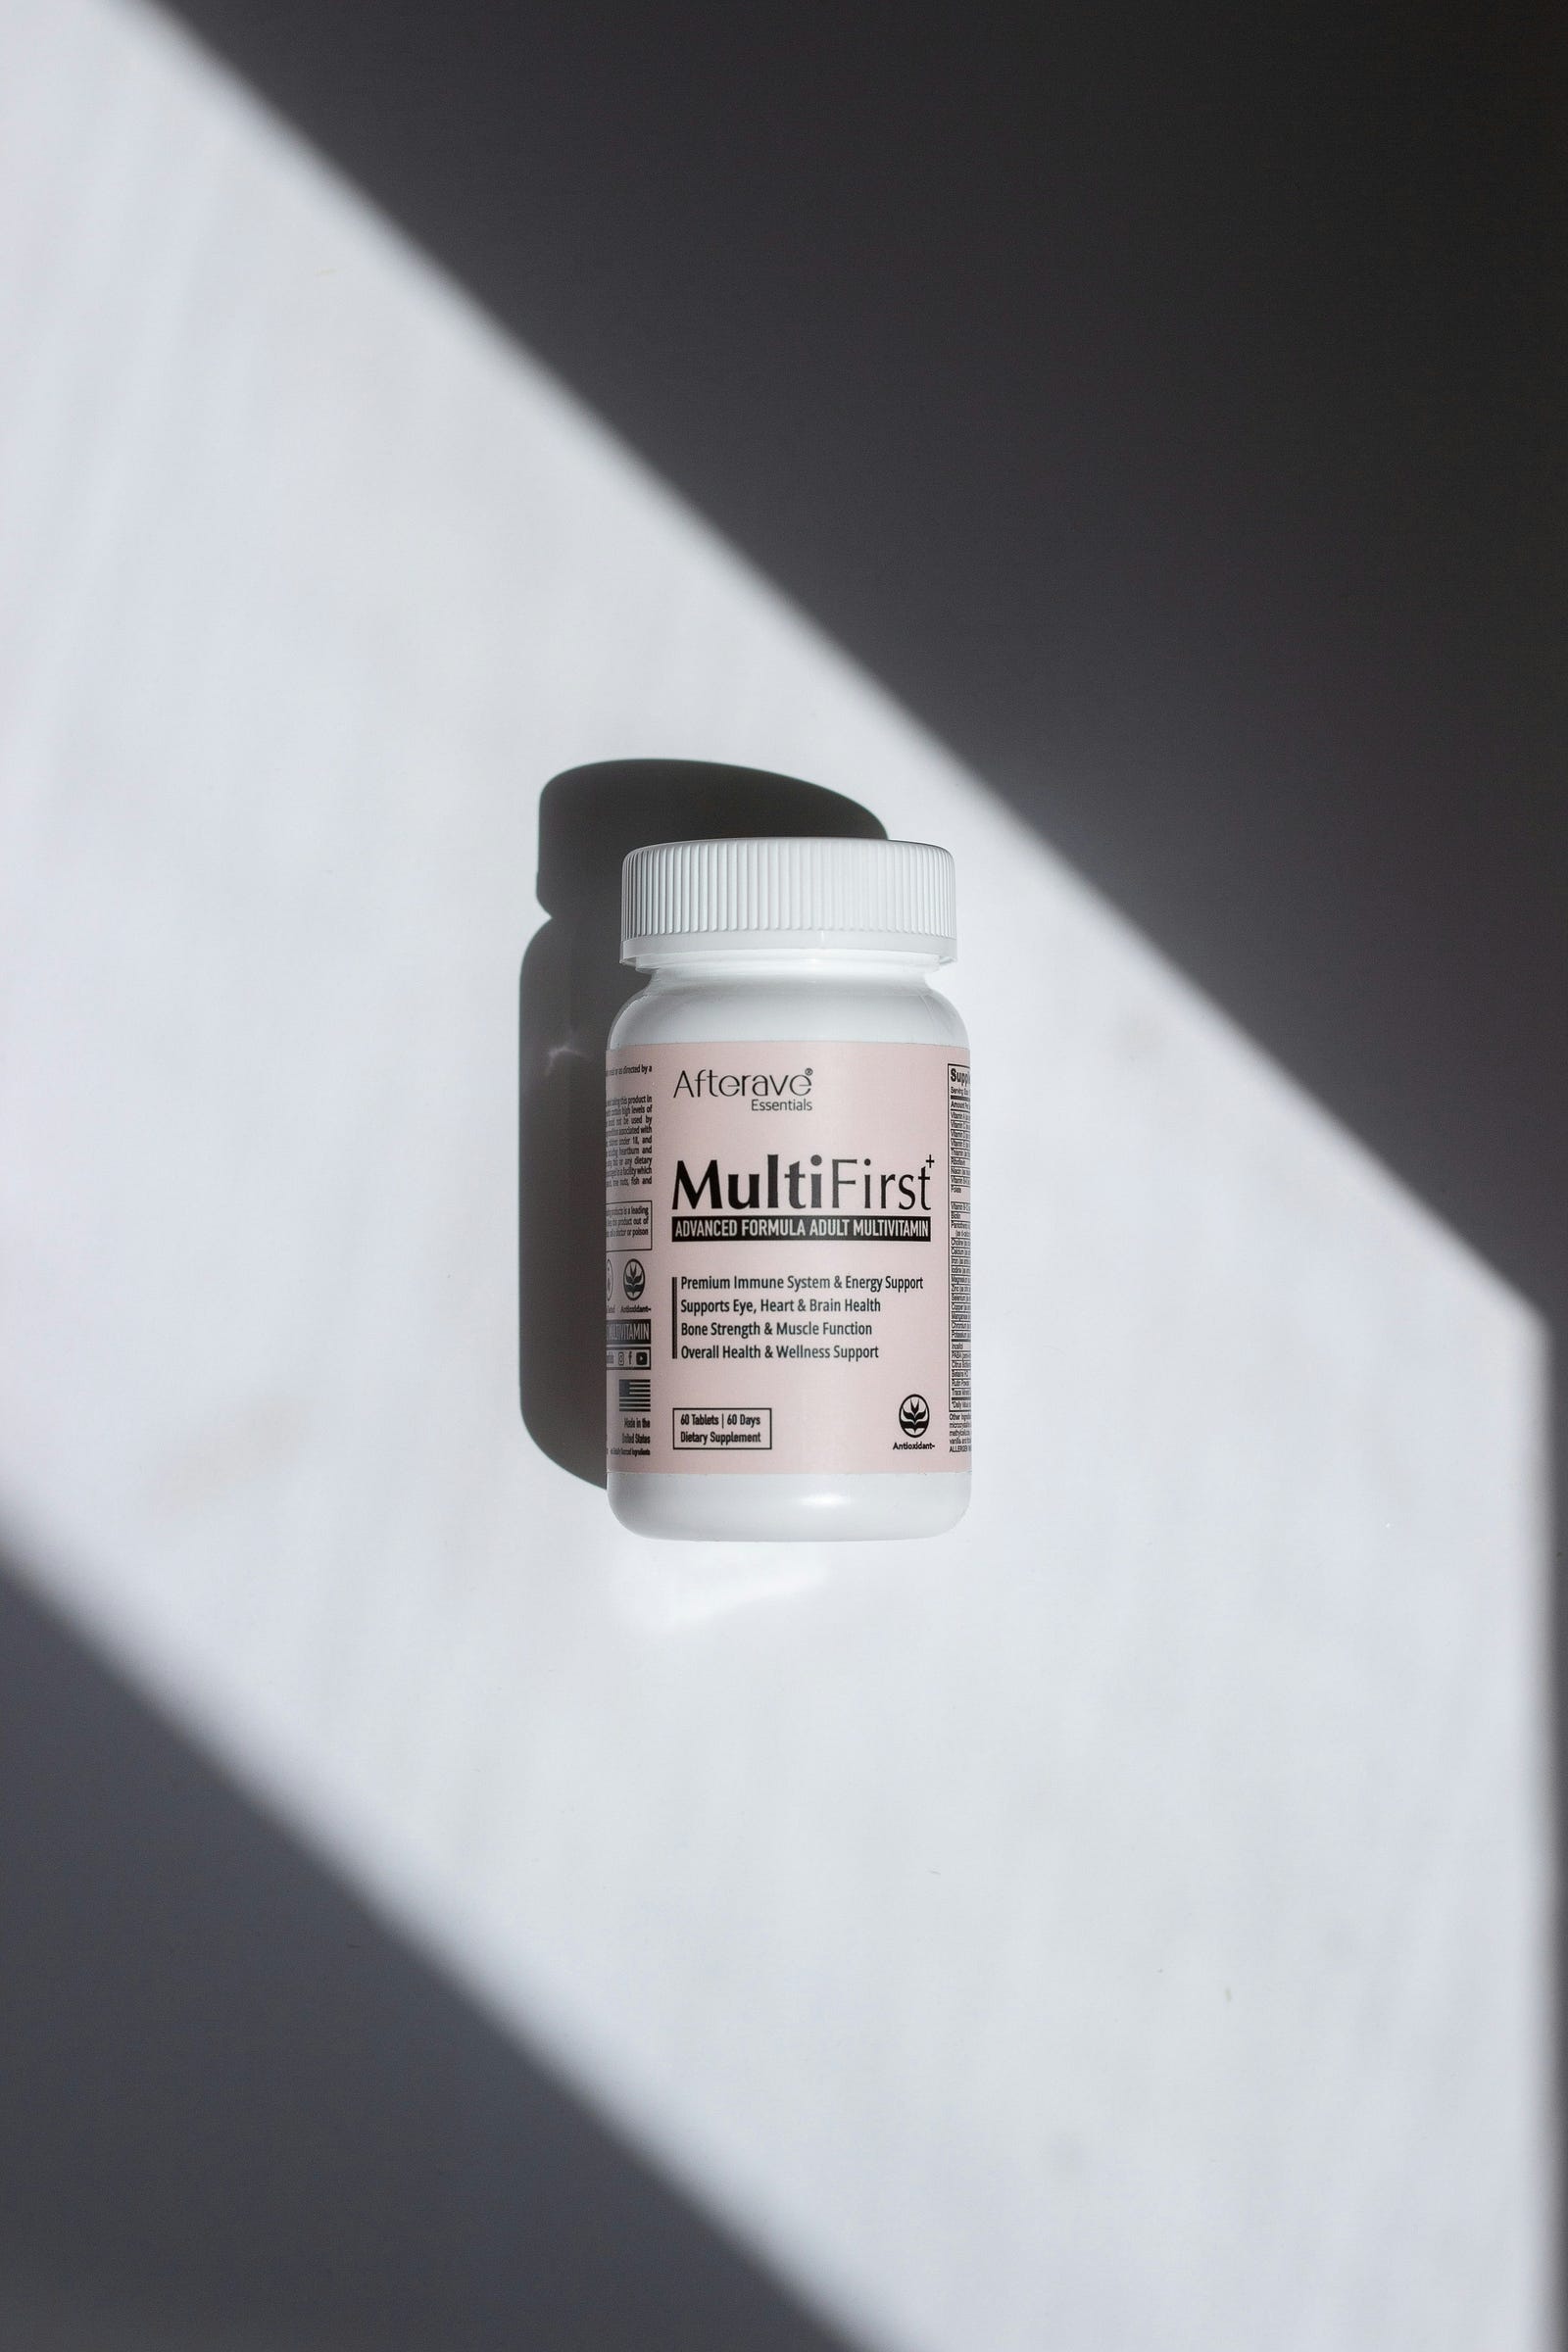 Multivitamins. Johnson adds them to his Blueprint program to slow aging.